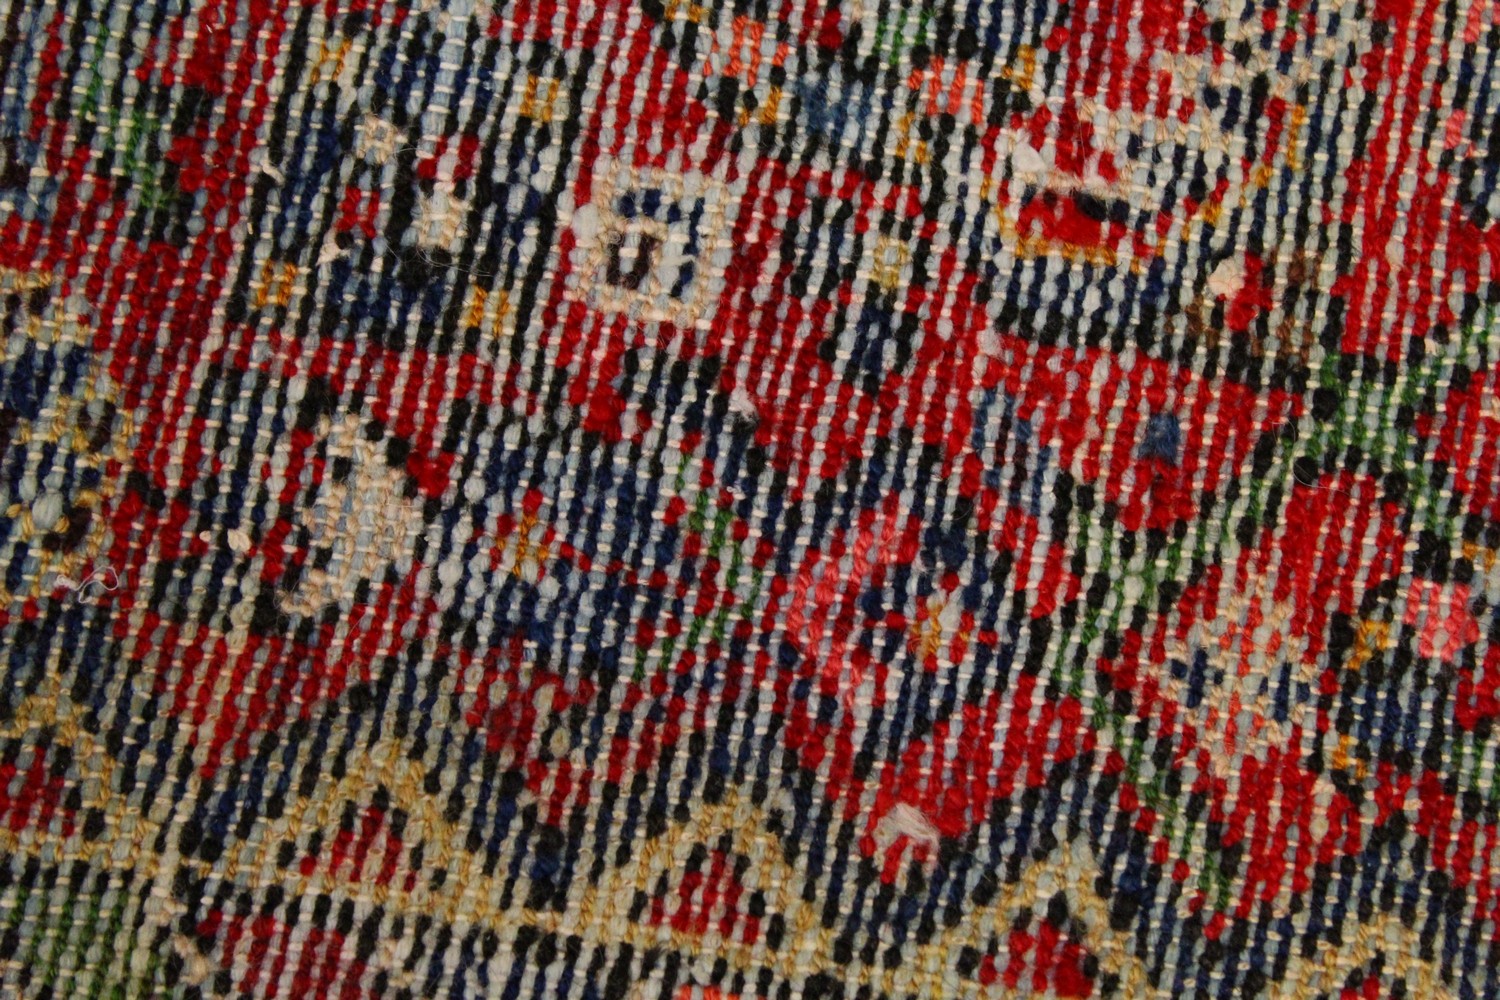 A PERSIAN CARPET, with an all-over design of motifs on a red ground. 9ft 9ins x 7ft. - Image 6 of 6